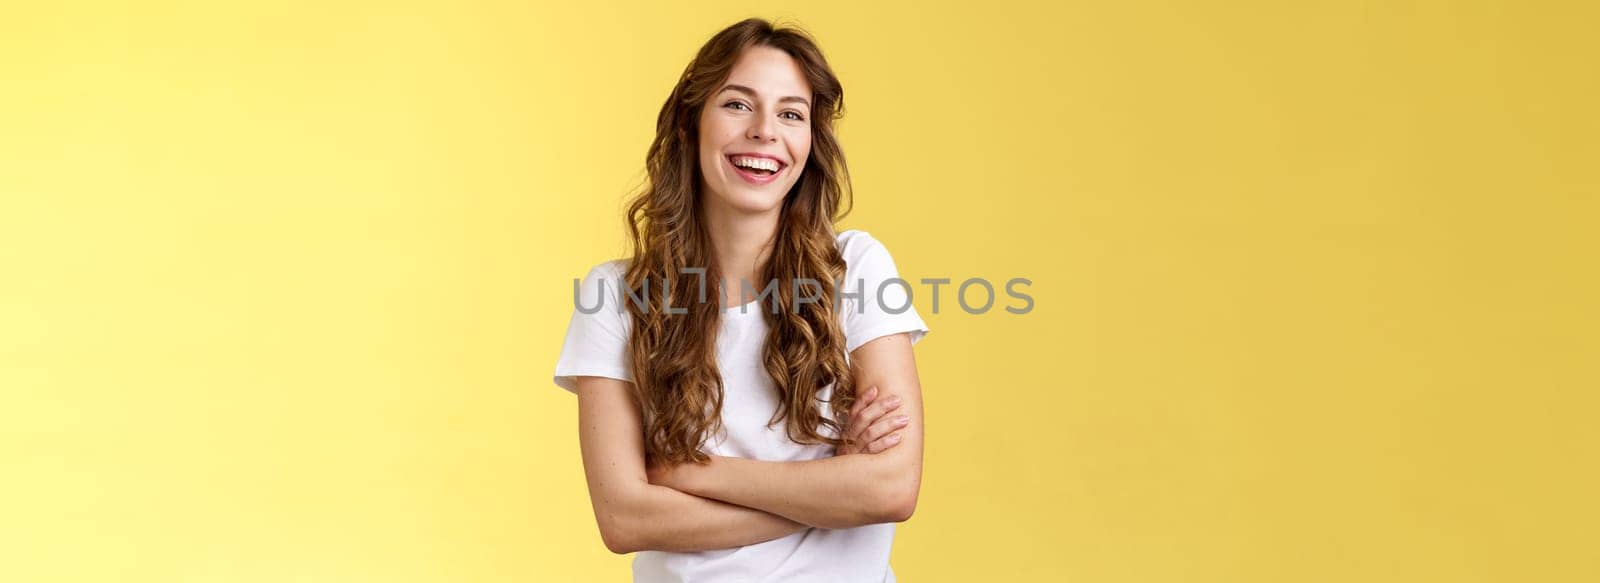 Entertain me. Friendly charismatic female long curly haircut laughing joyfully hang out friends cross arms chest feel chilly slightly cold have amusing pleasant conversation yellow background by Benzoix